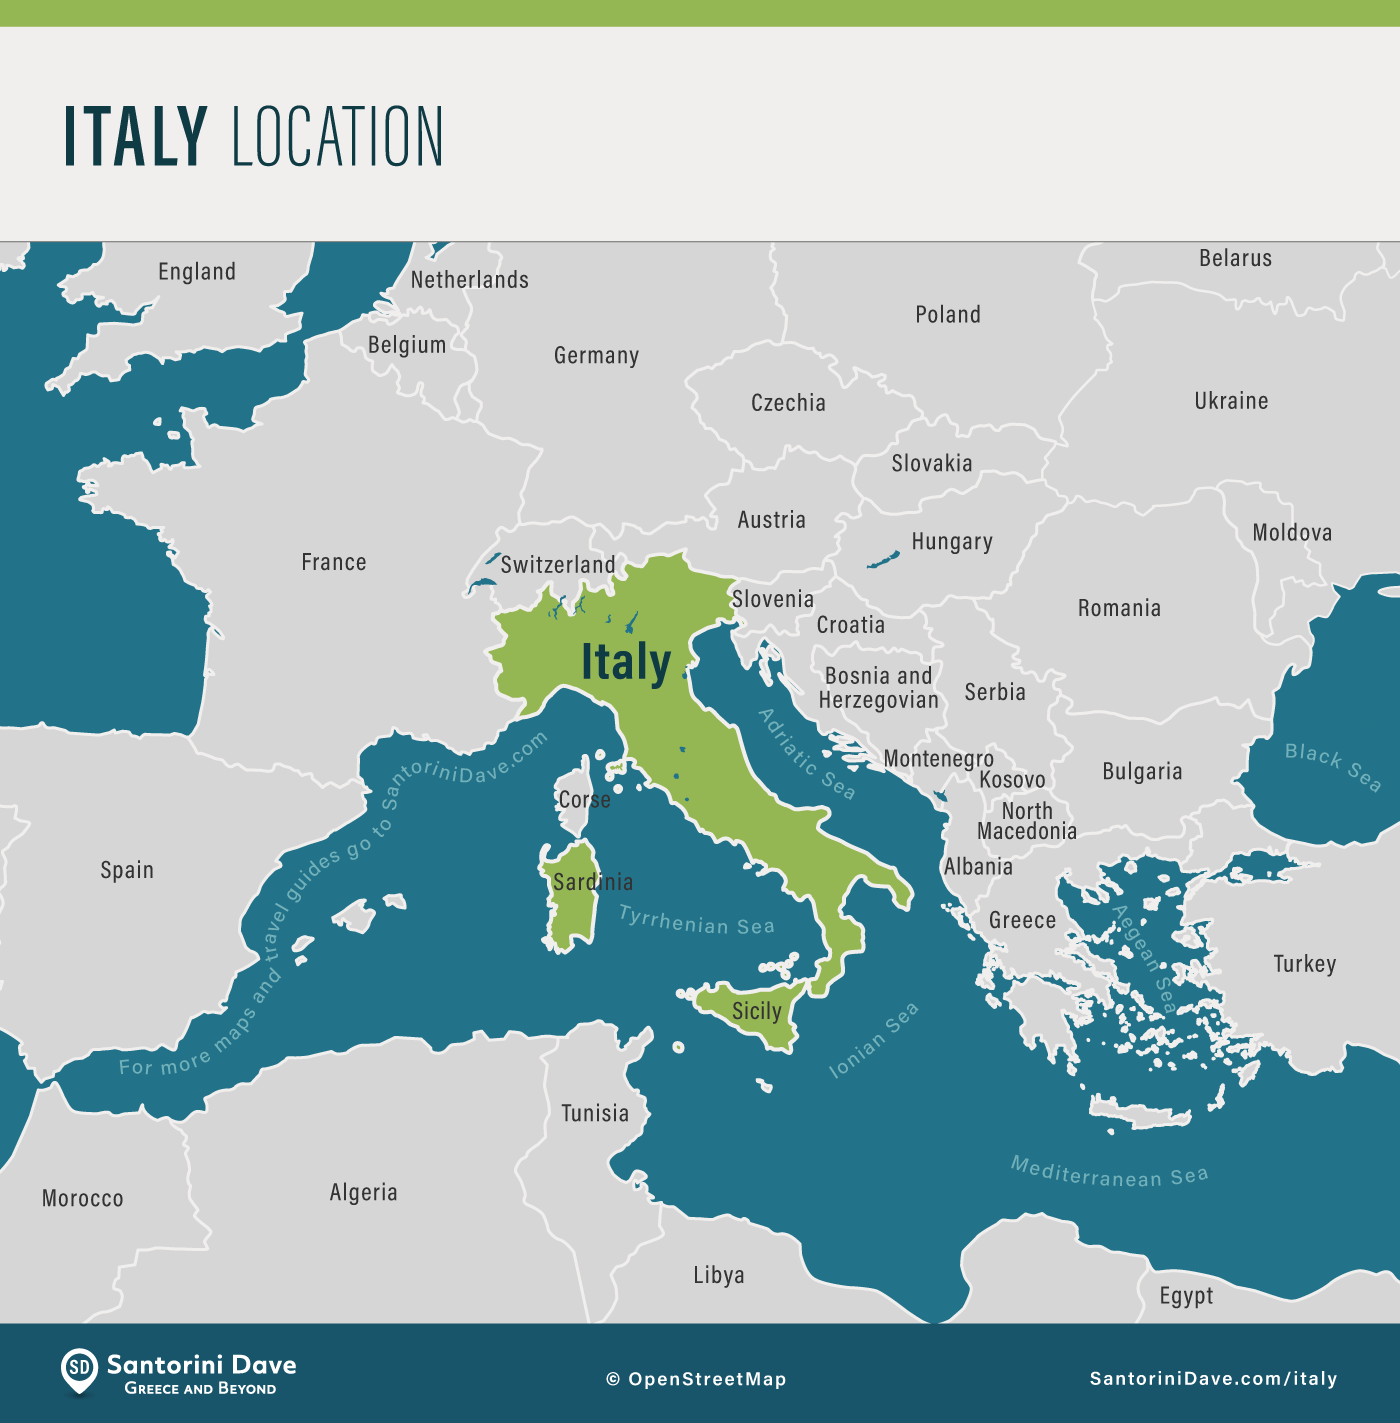 Map showing the location of Italy in relation to its surrounding countries in the region.